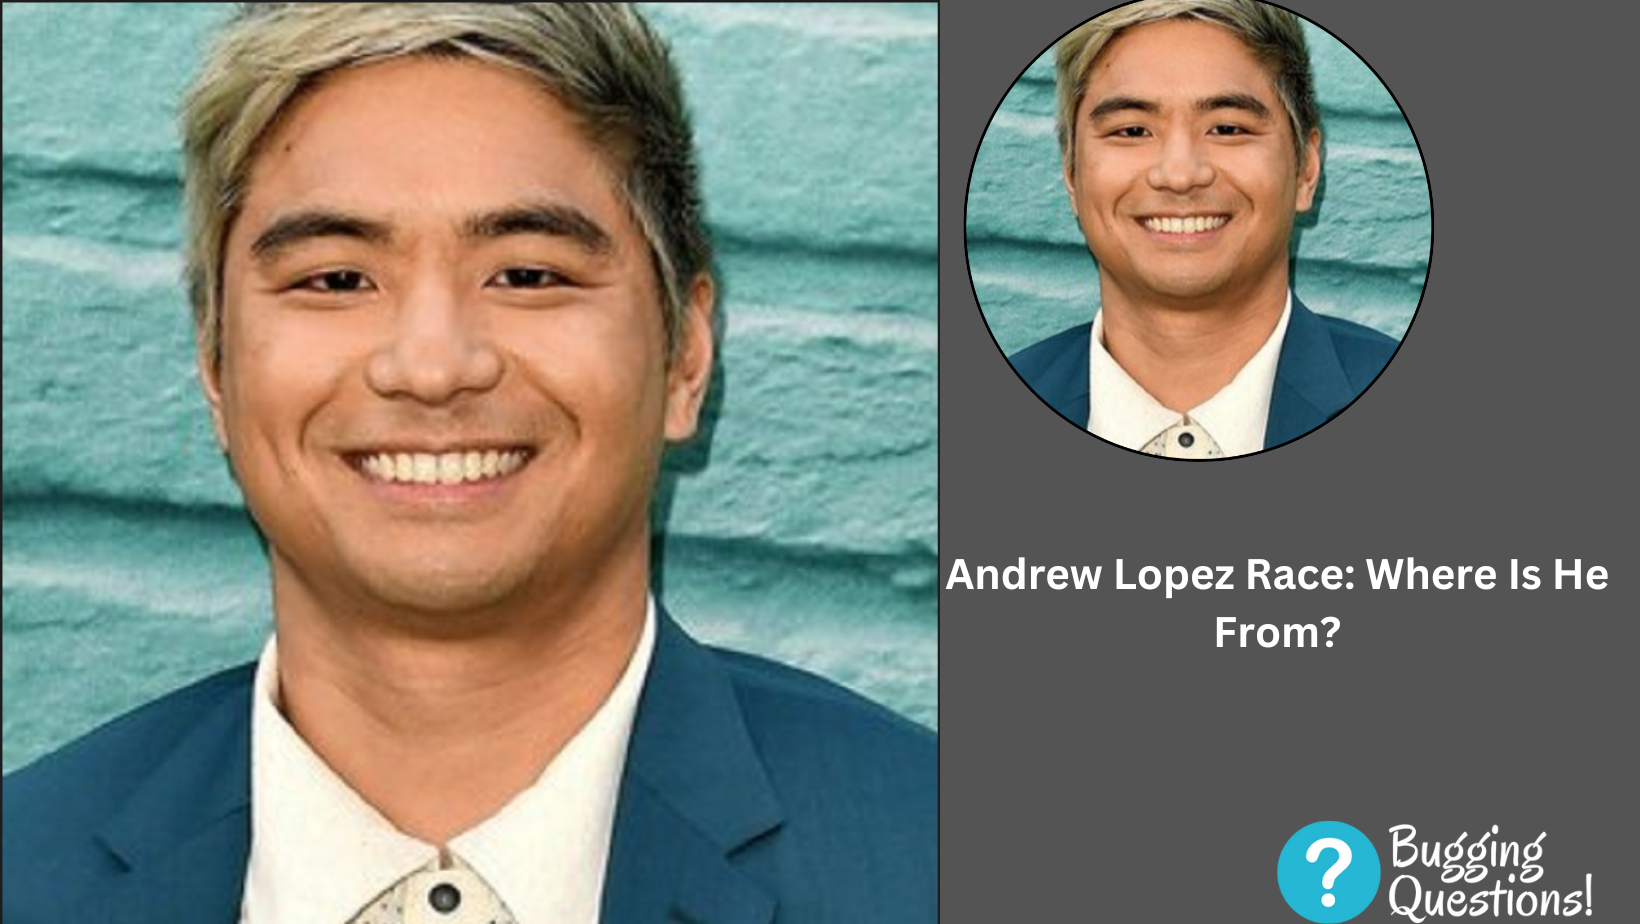 Andrew Lopez Race: Where Is He From?